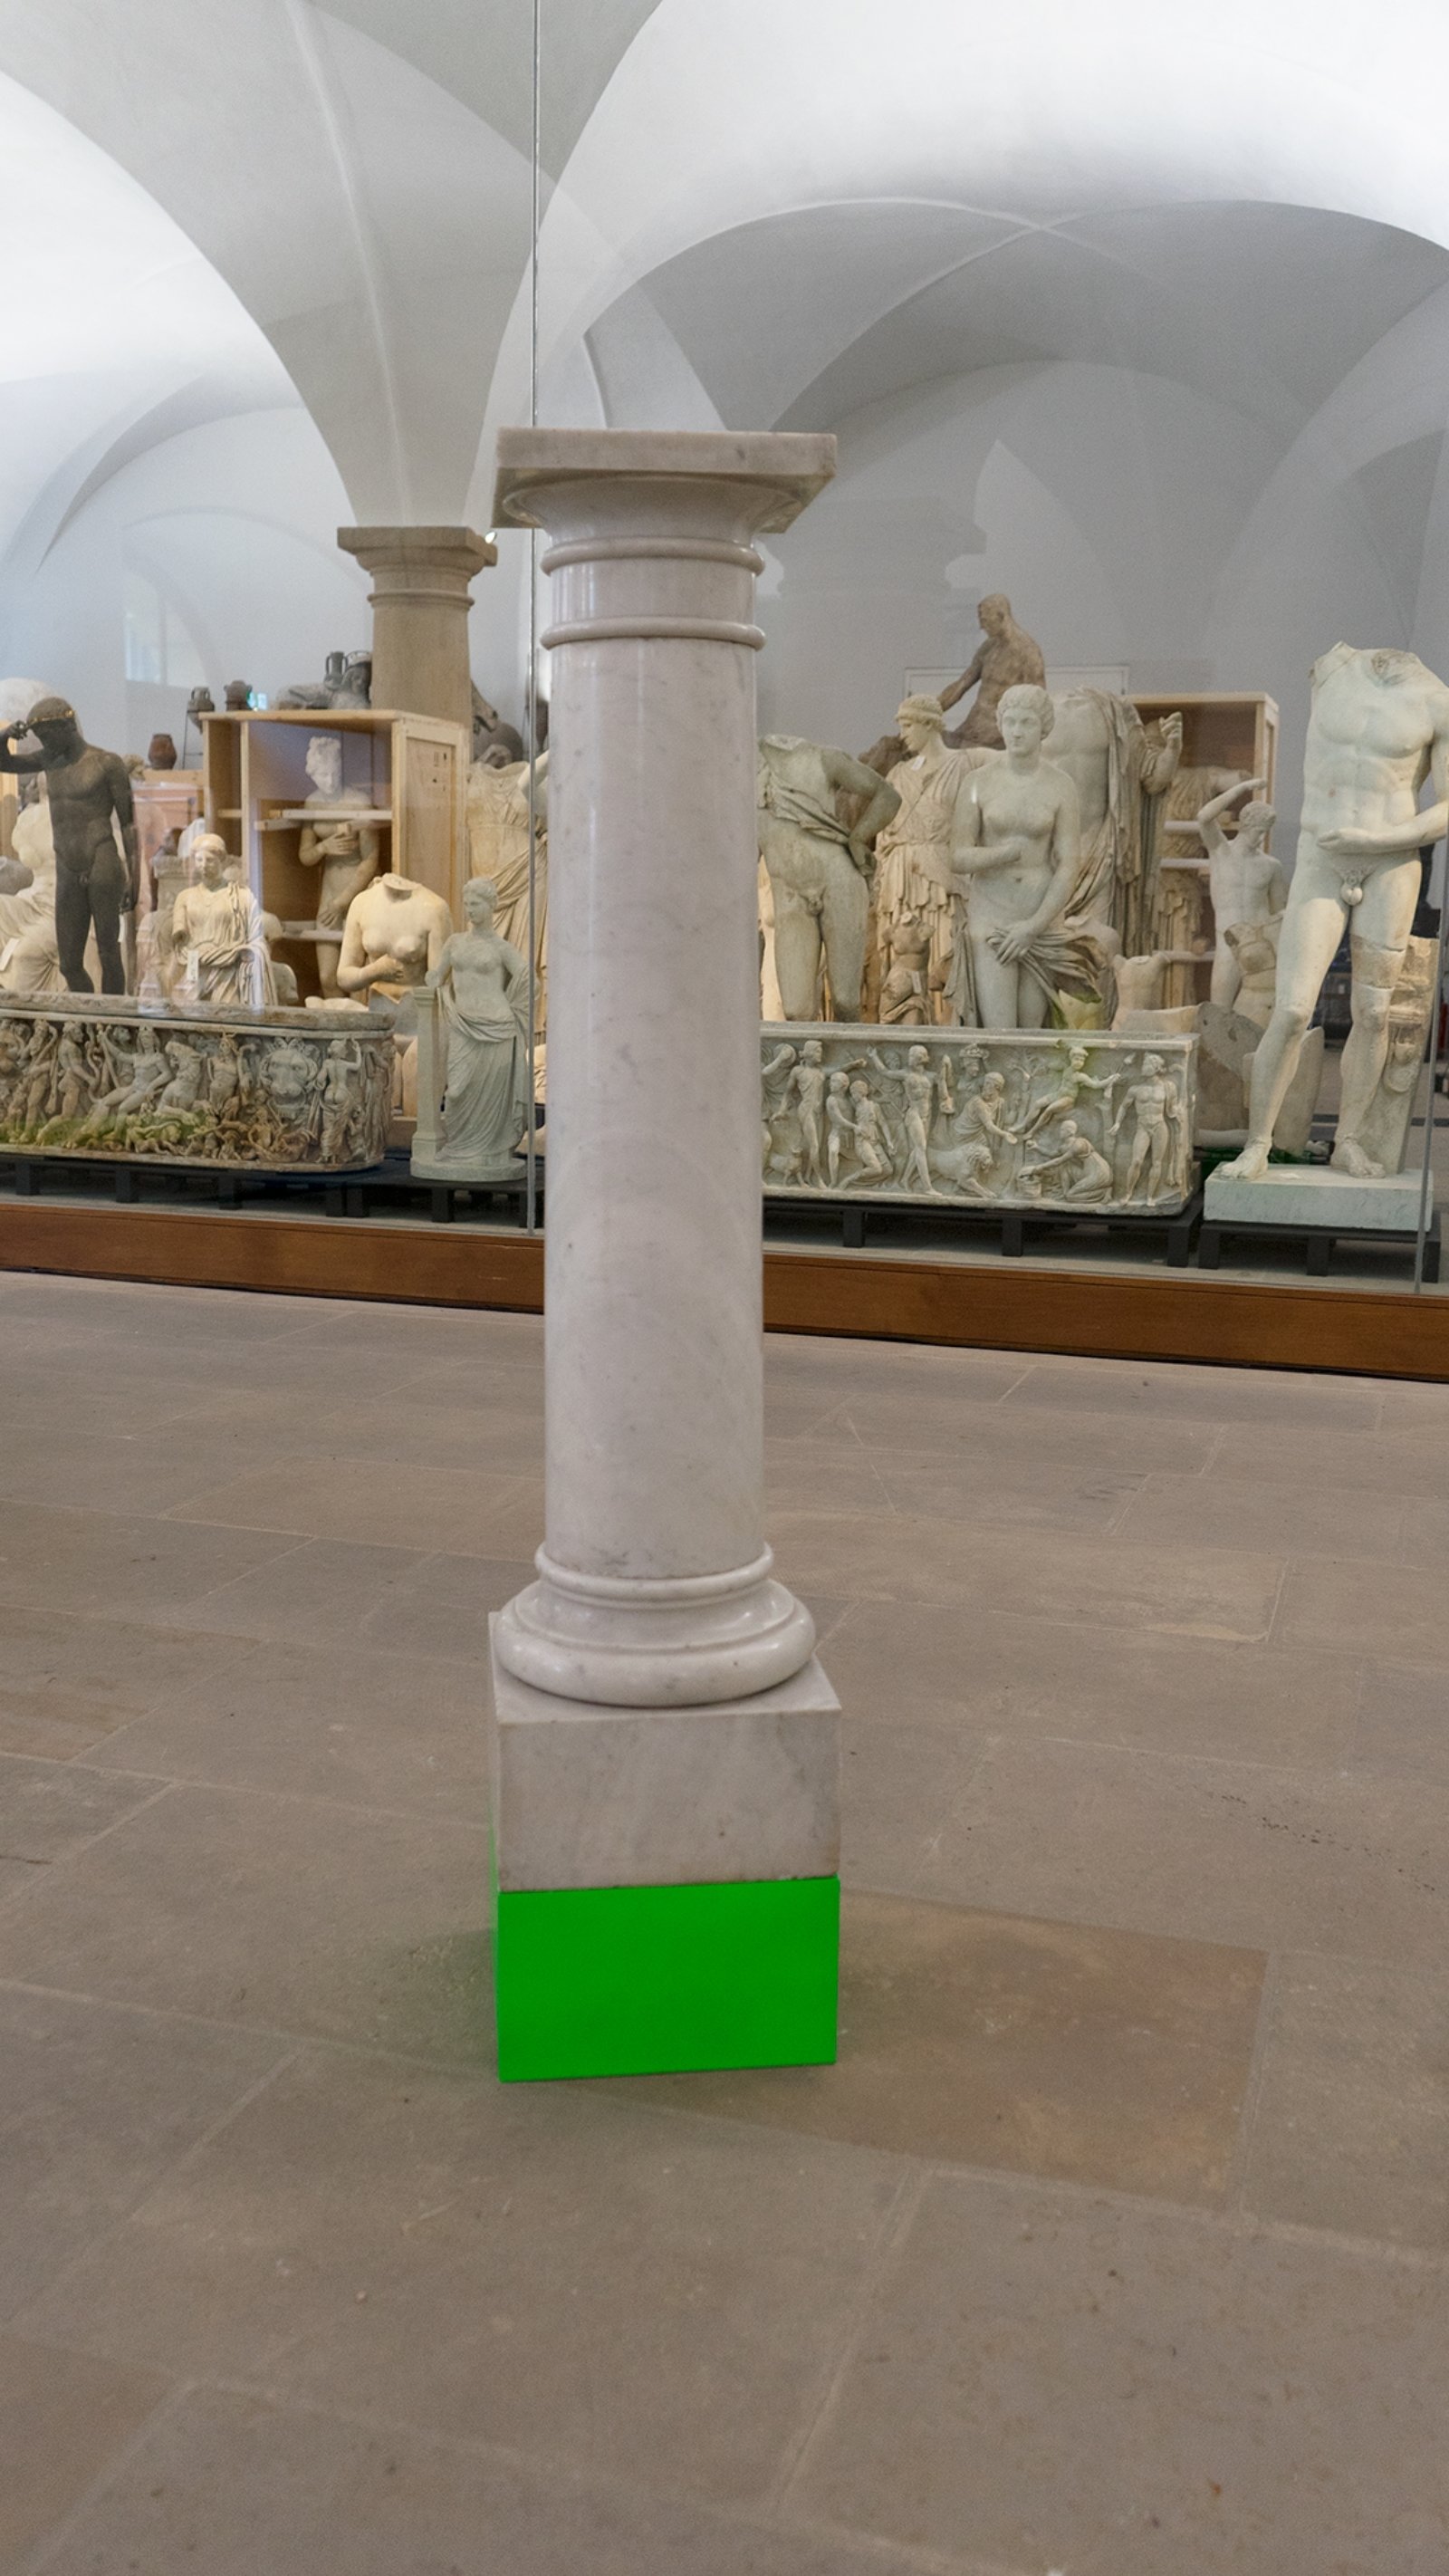 Judy Radul, Show Support, 2019, custom controlled live video camera system, historical plinths from Albertinum collection, bases painted in highlighter pen colours, dimensions variable. Installation view, Demonstrationsräume. Céline Condorelli, Kapwani Kiwanga, Judy Radul, Albertinum, Dresden, Germany, 2019